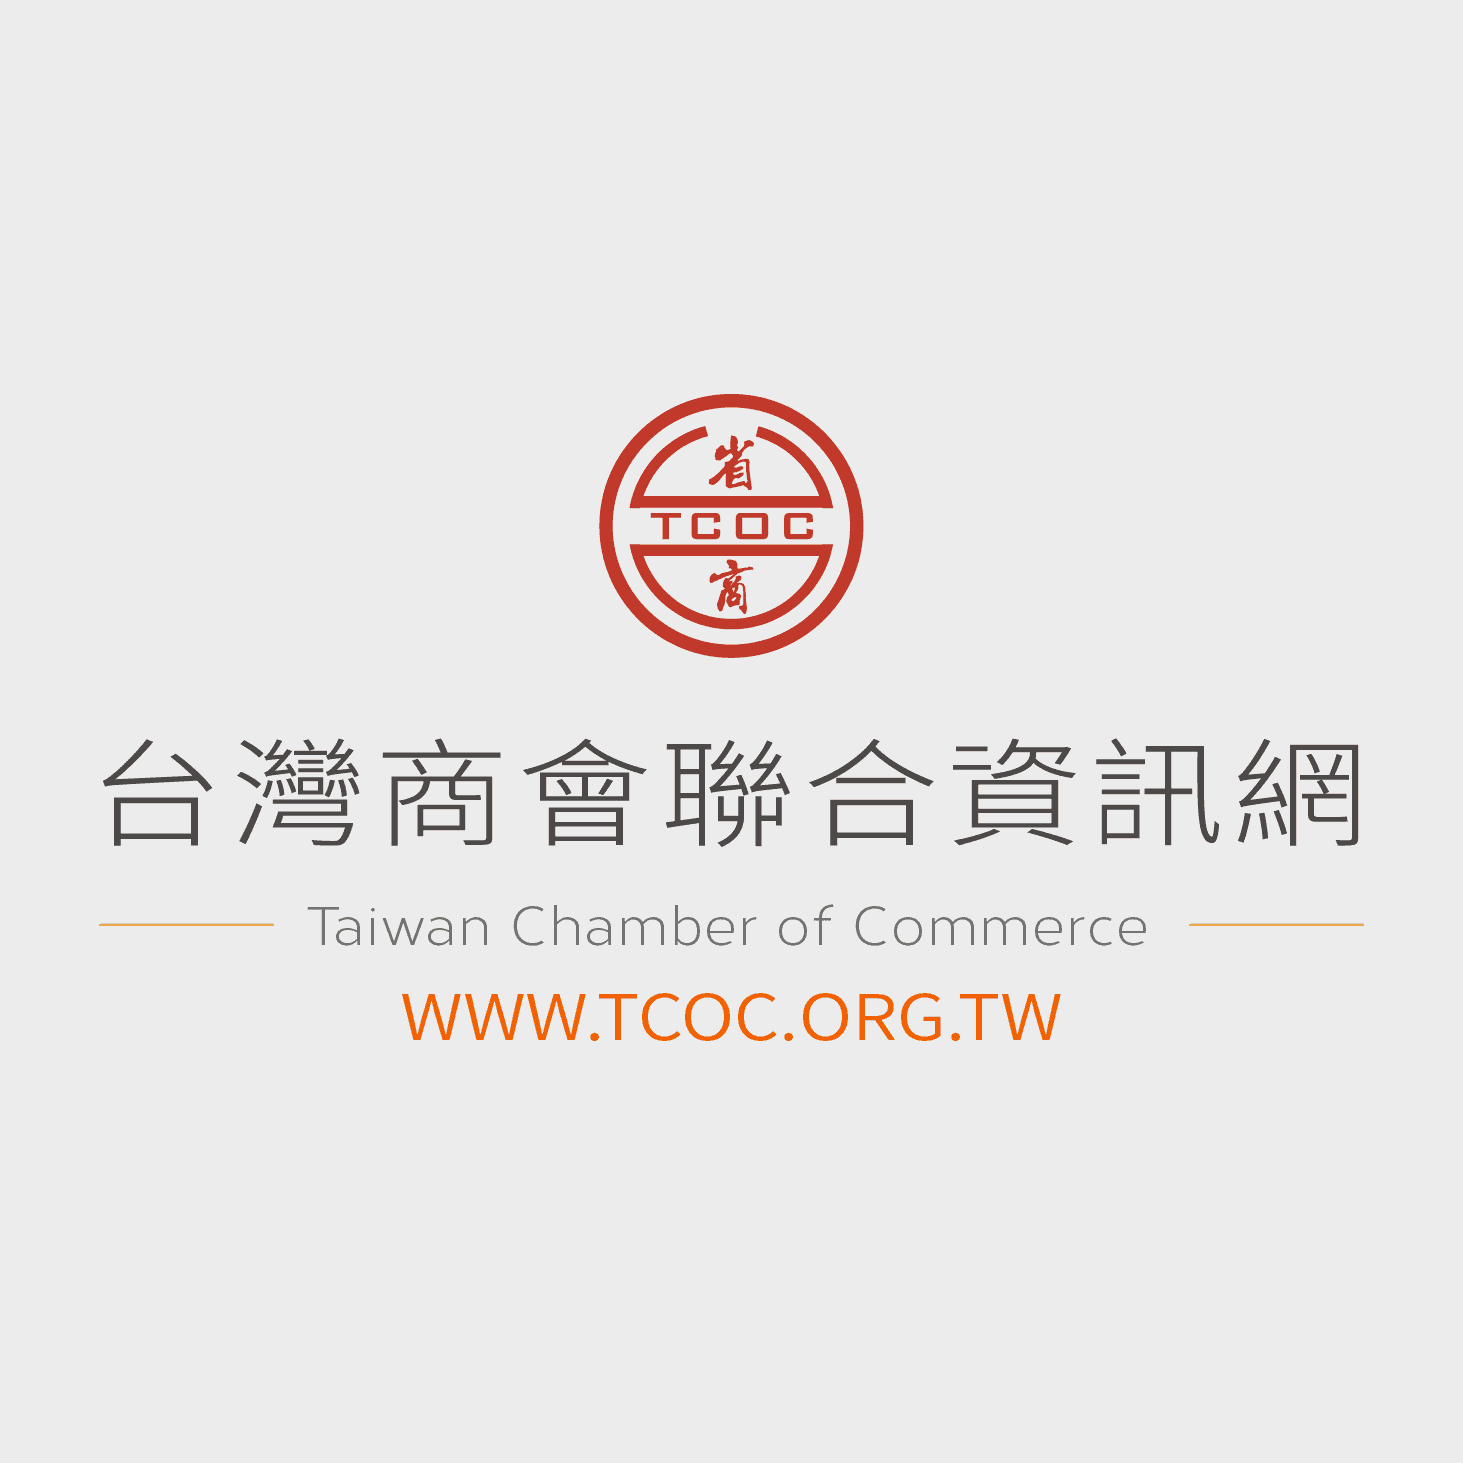 Taiwan Chamber of Commerce